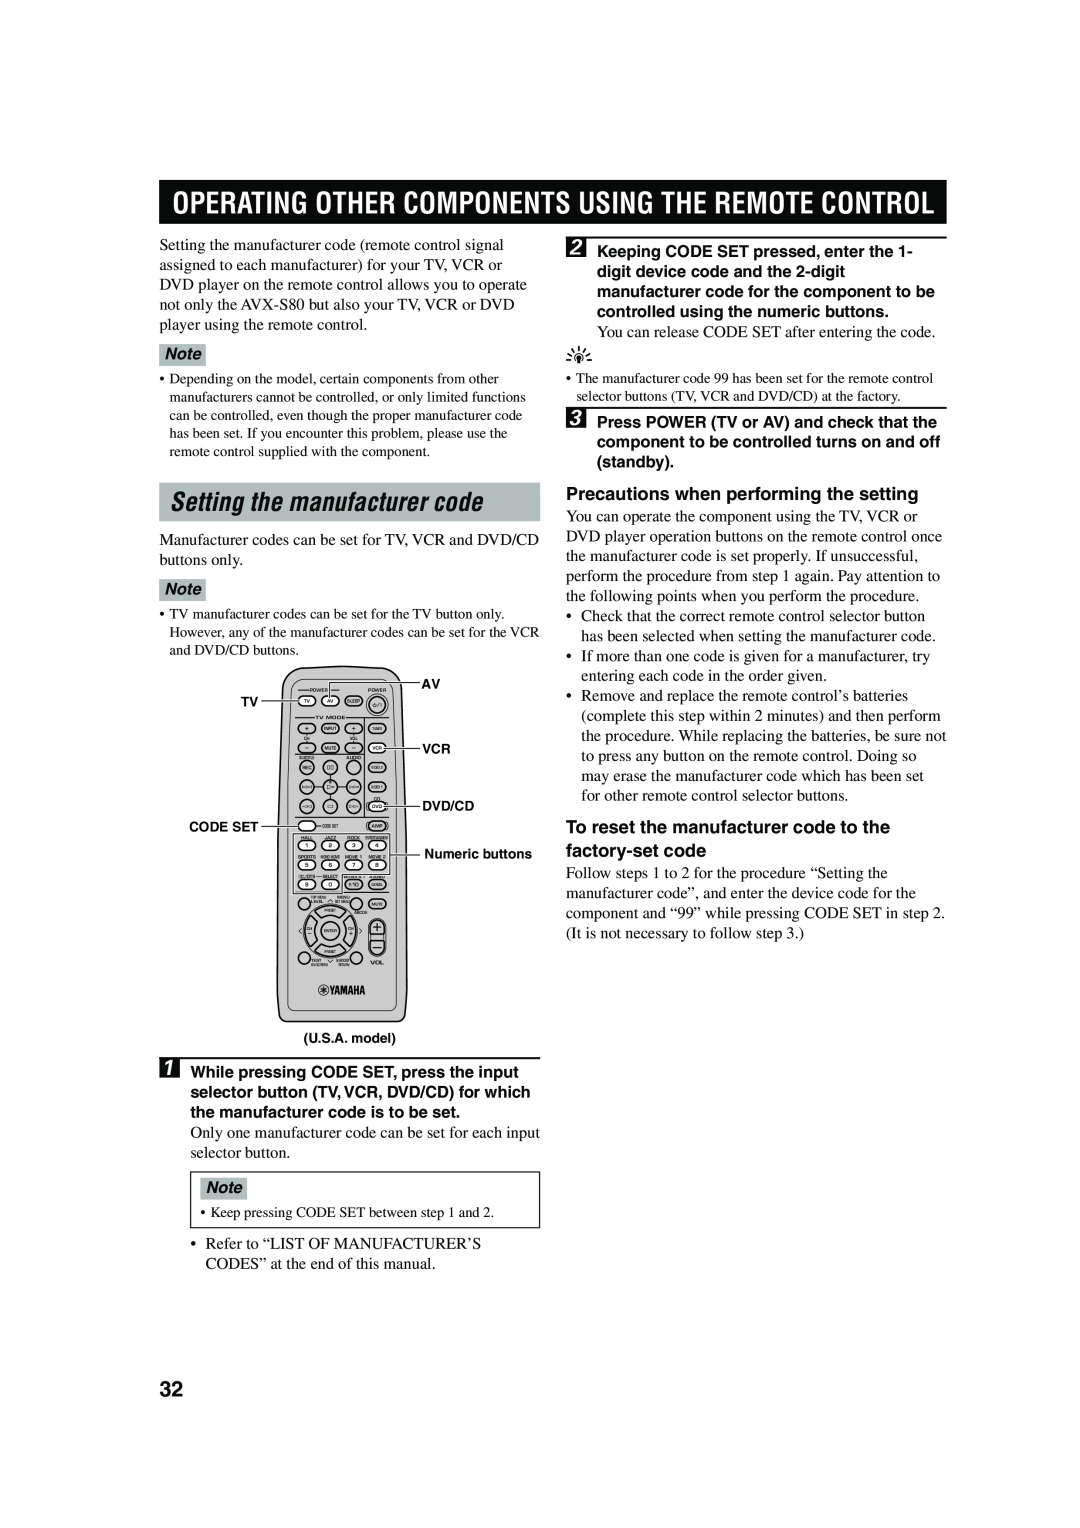 Yamaha AVX-S80, HOMETHEATER SOUND SYSTEM owner manual Setting the manufacturer code, Precautions when performing the setting 